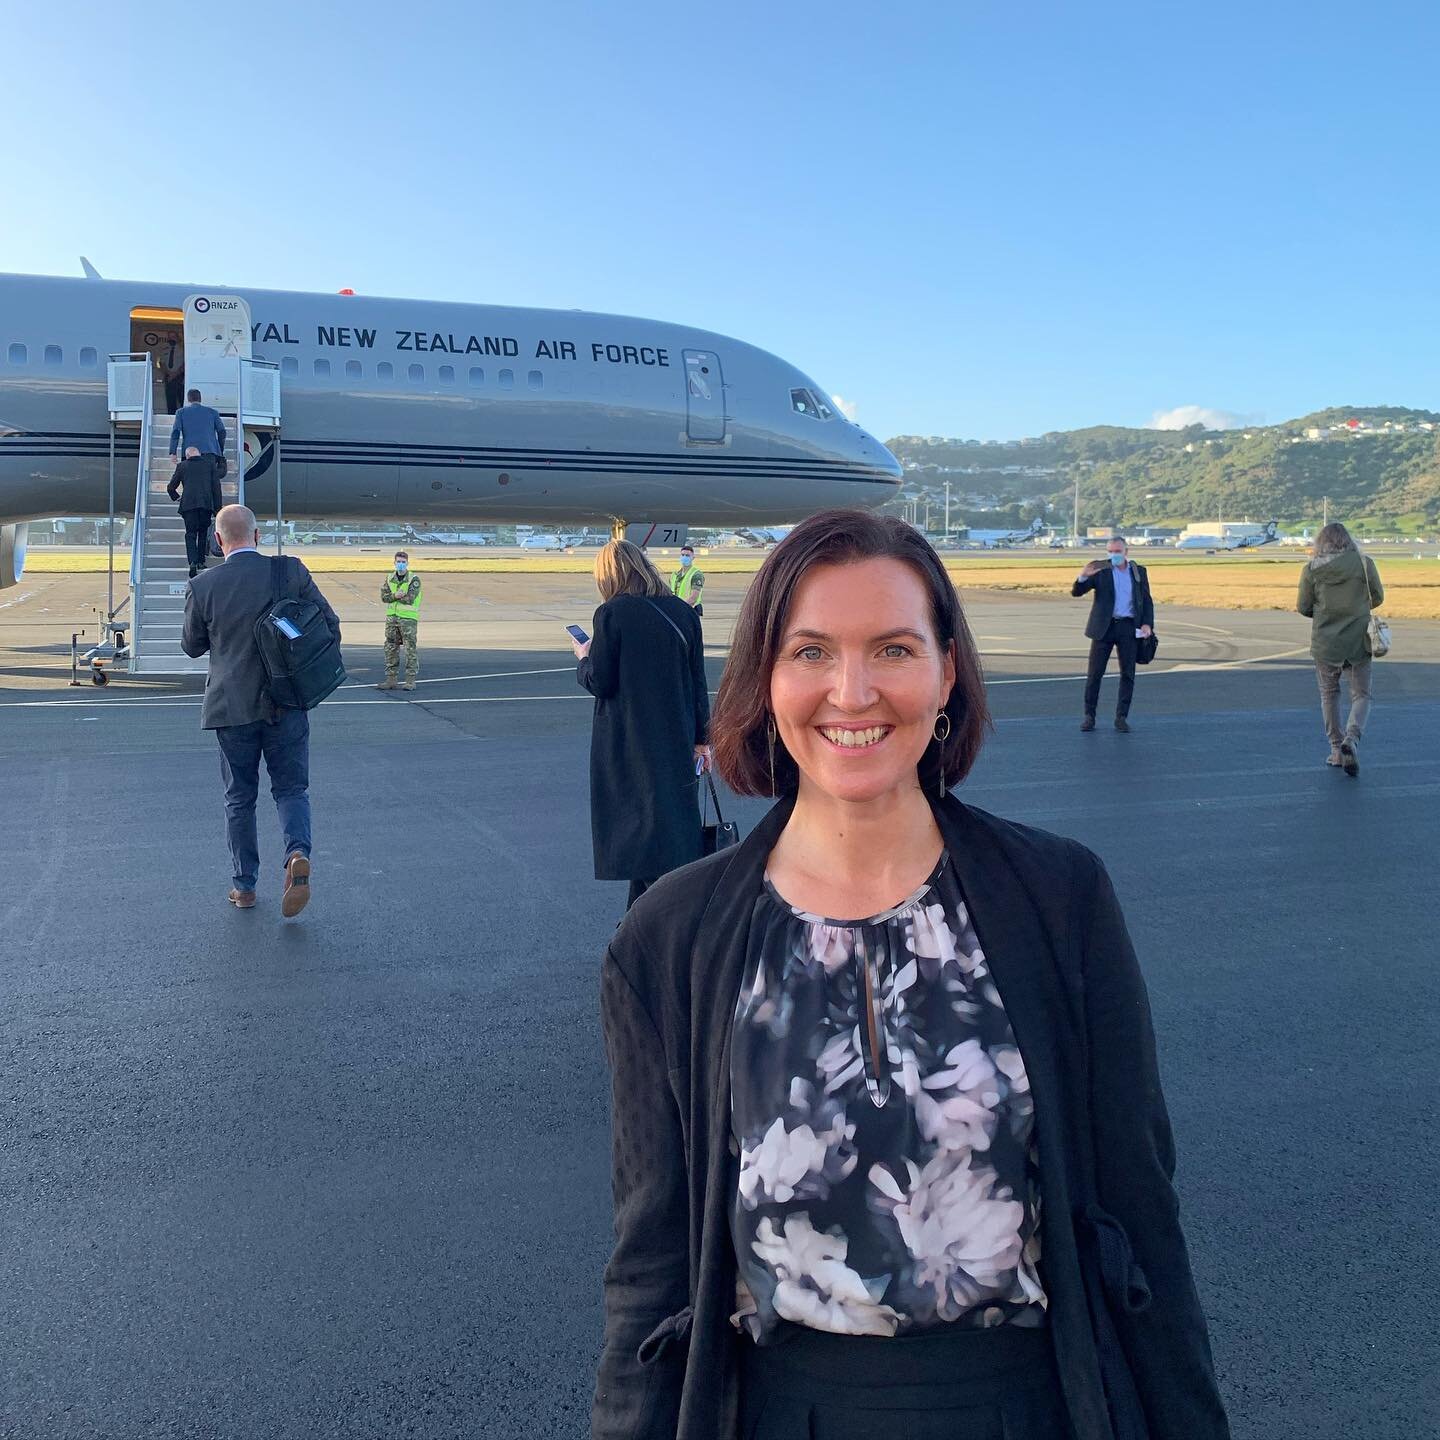 Sarah took networking to a whole new level for us yesterday - representing us as part of the Prime Ministers Australian Trade Mission. It&rsquo;s great to hear Advanced Manufacturing is so high on both the NZ and Oz agendas. #australiatrademission #c